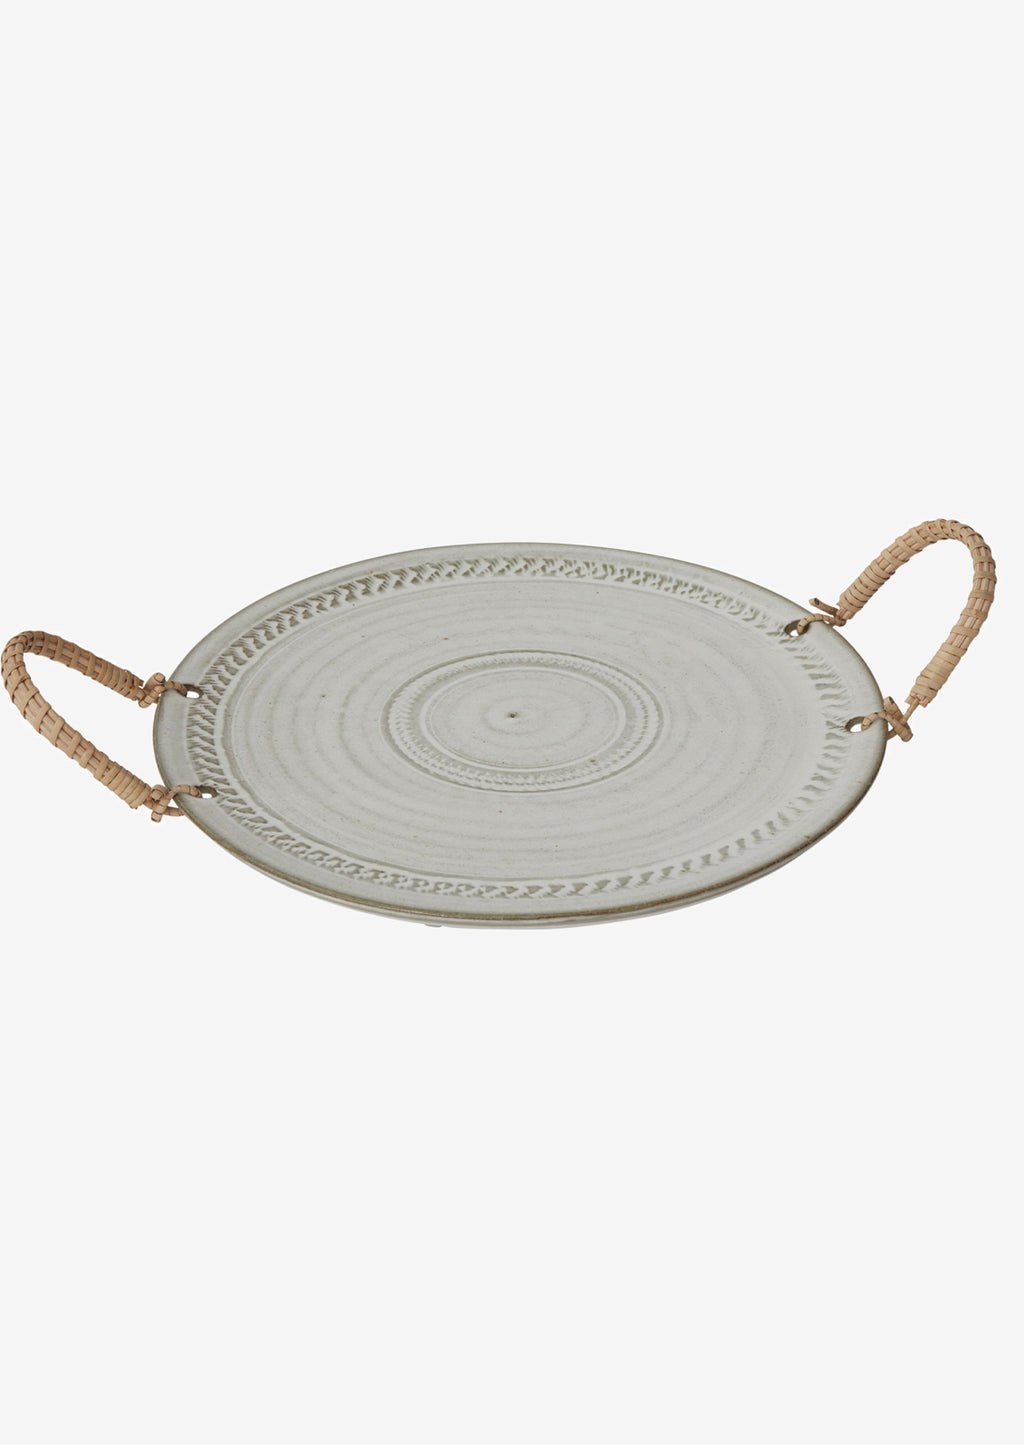 2: A round ceramic tray with neutral finish and rattan handles.